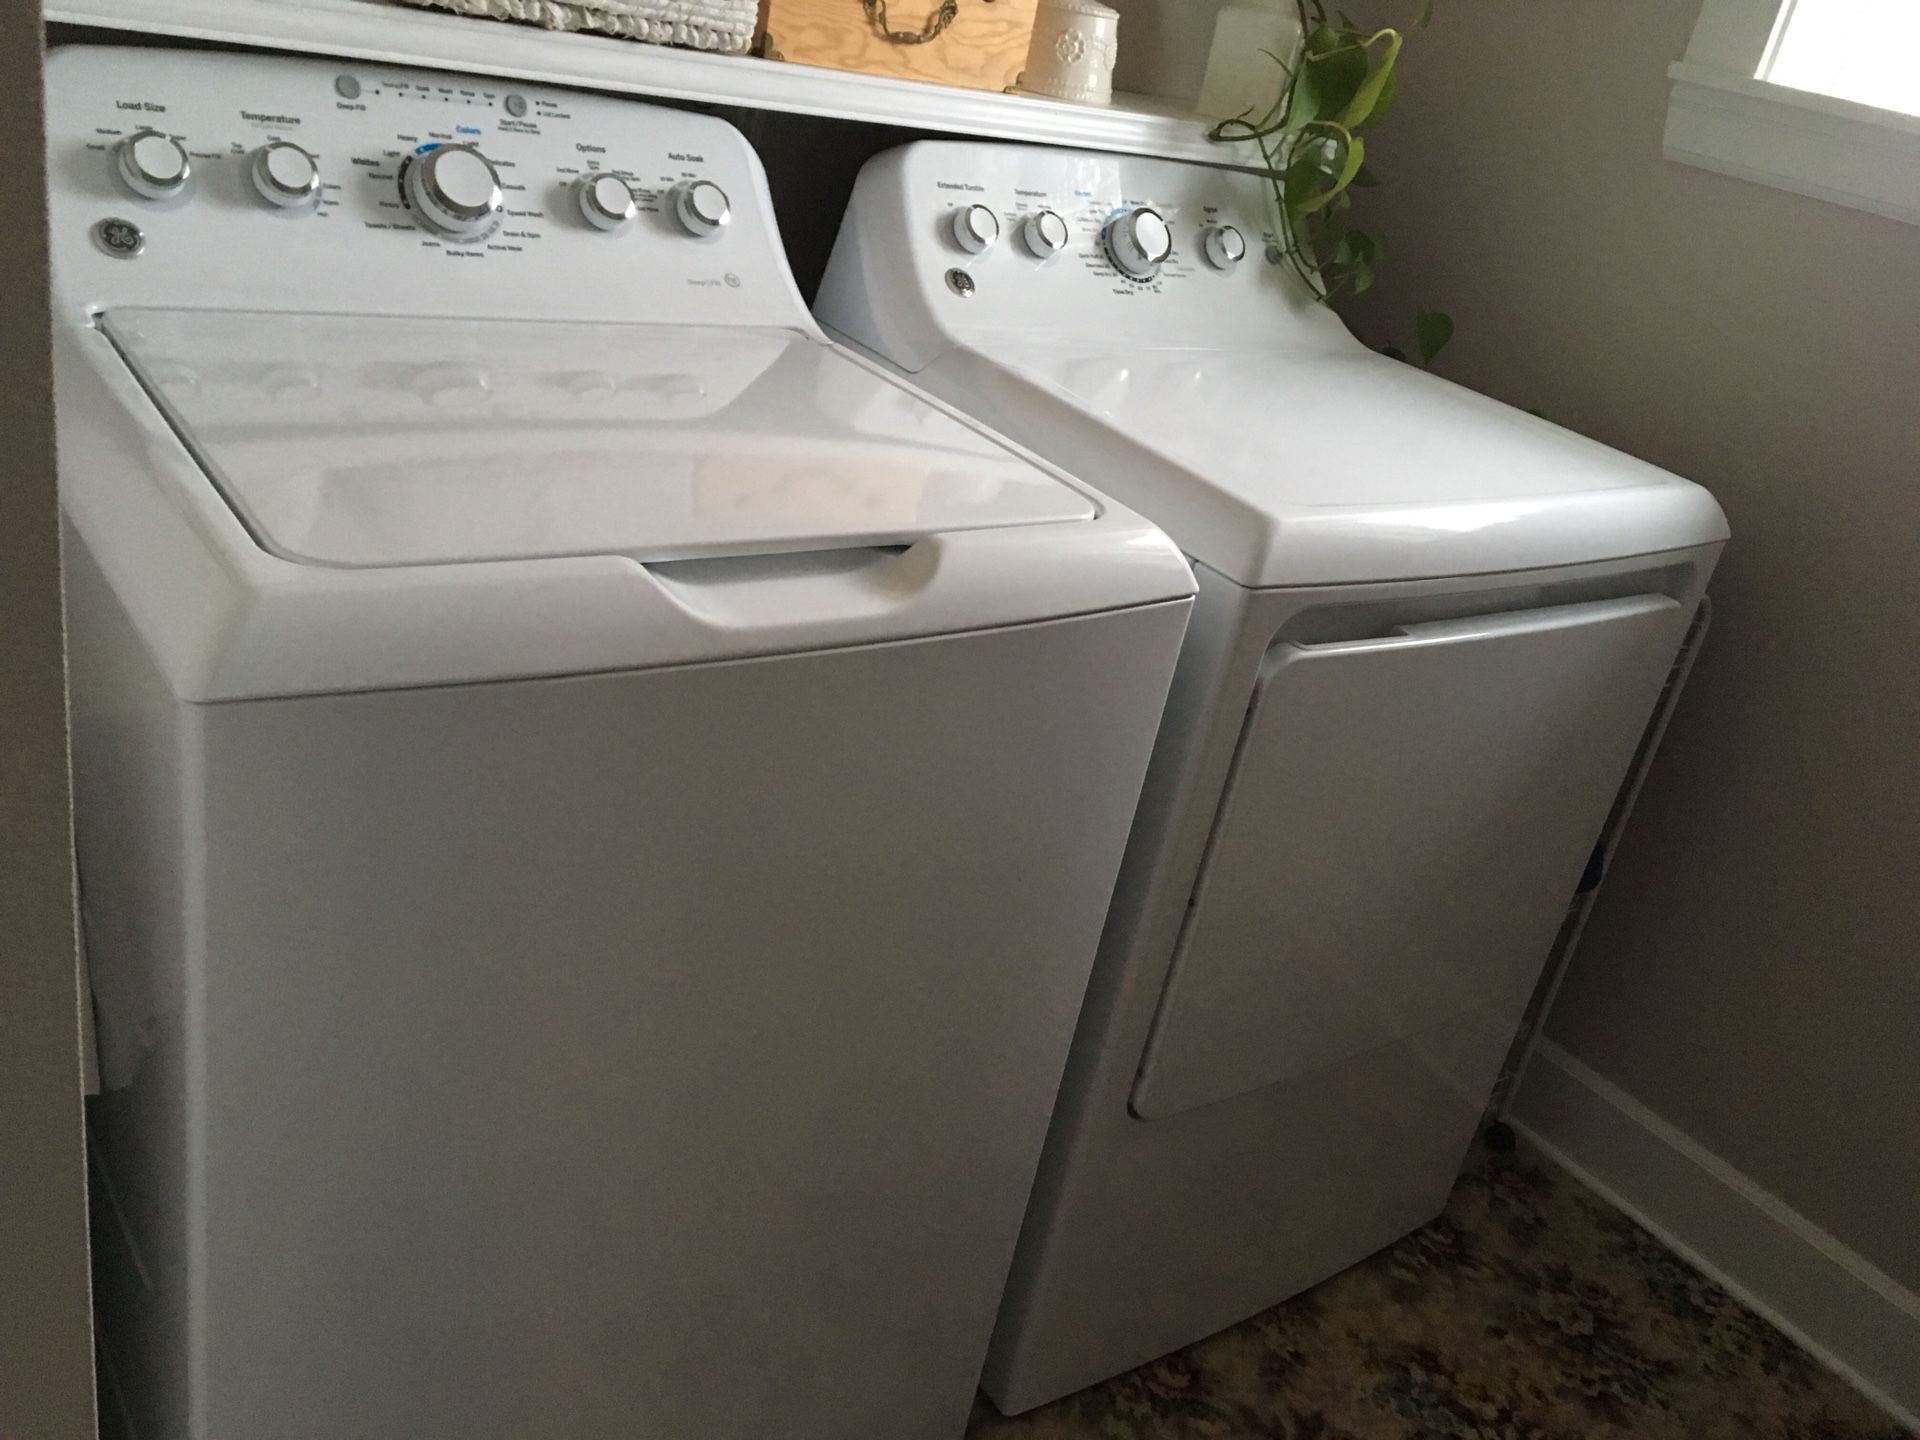 GE Washer and electric Dryer. Large capacity, energy efficient. Clean with no dents or scratches. 2 years old. 4.2 cu ft. Dryer & 7.2 cu. ft. Washer